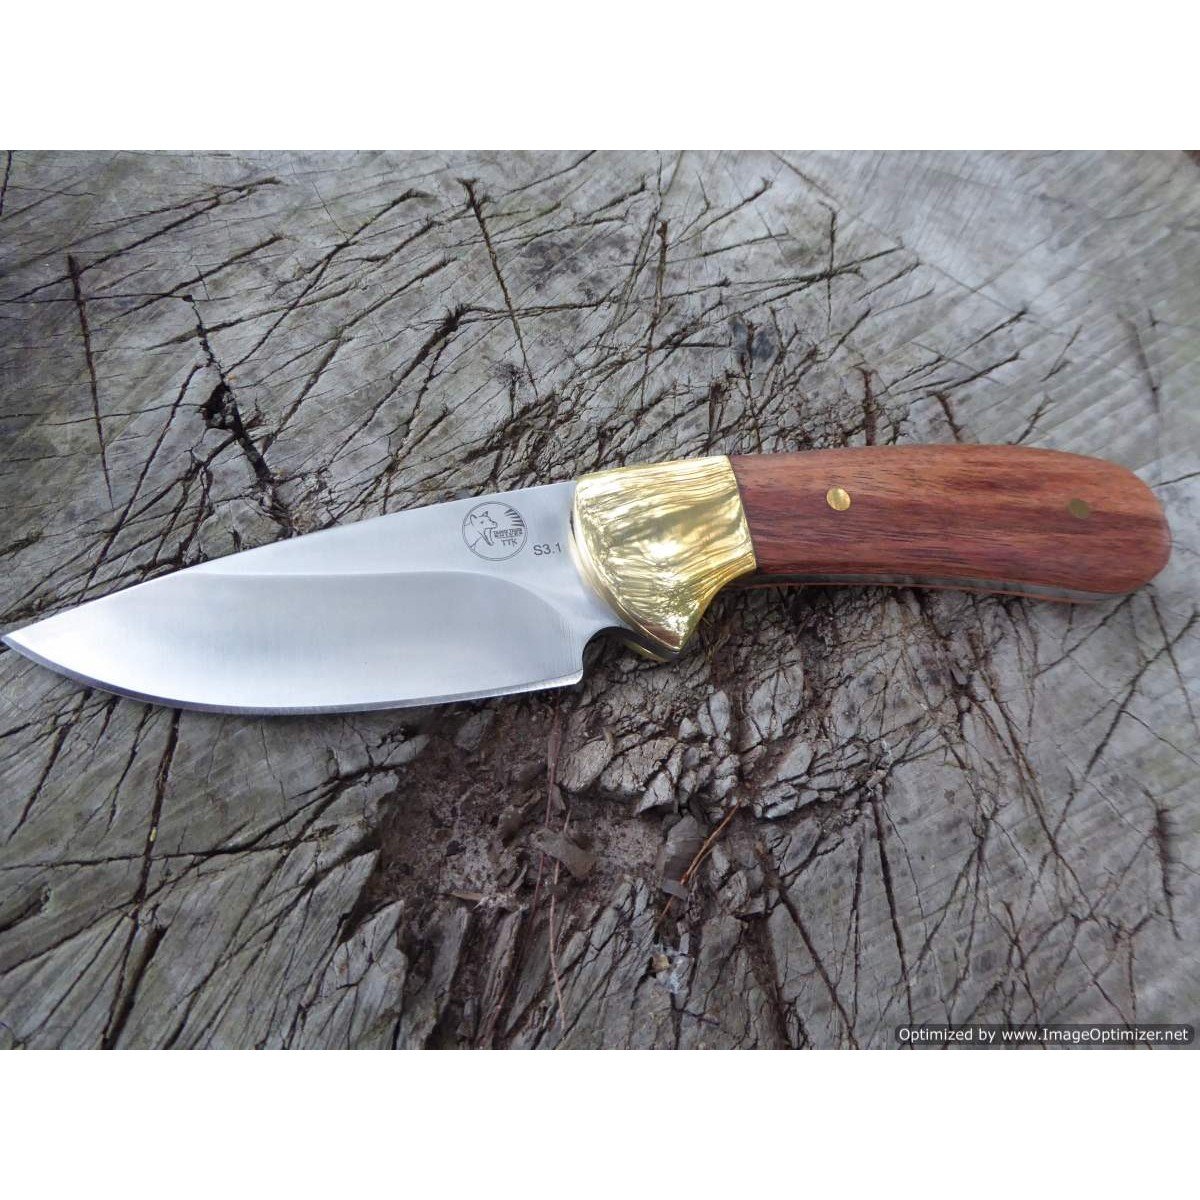 tassie tiger knives 3 1skinning knife with leather sheath 378 1200x1200 1